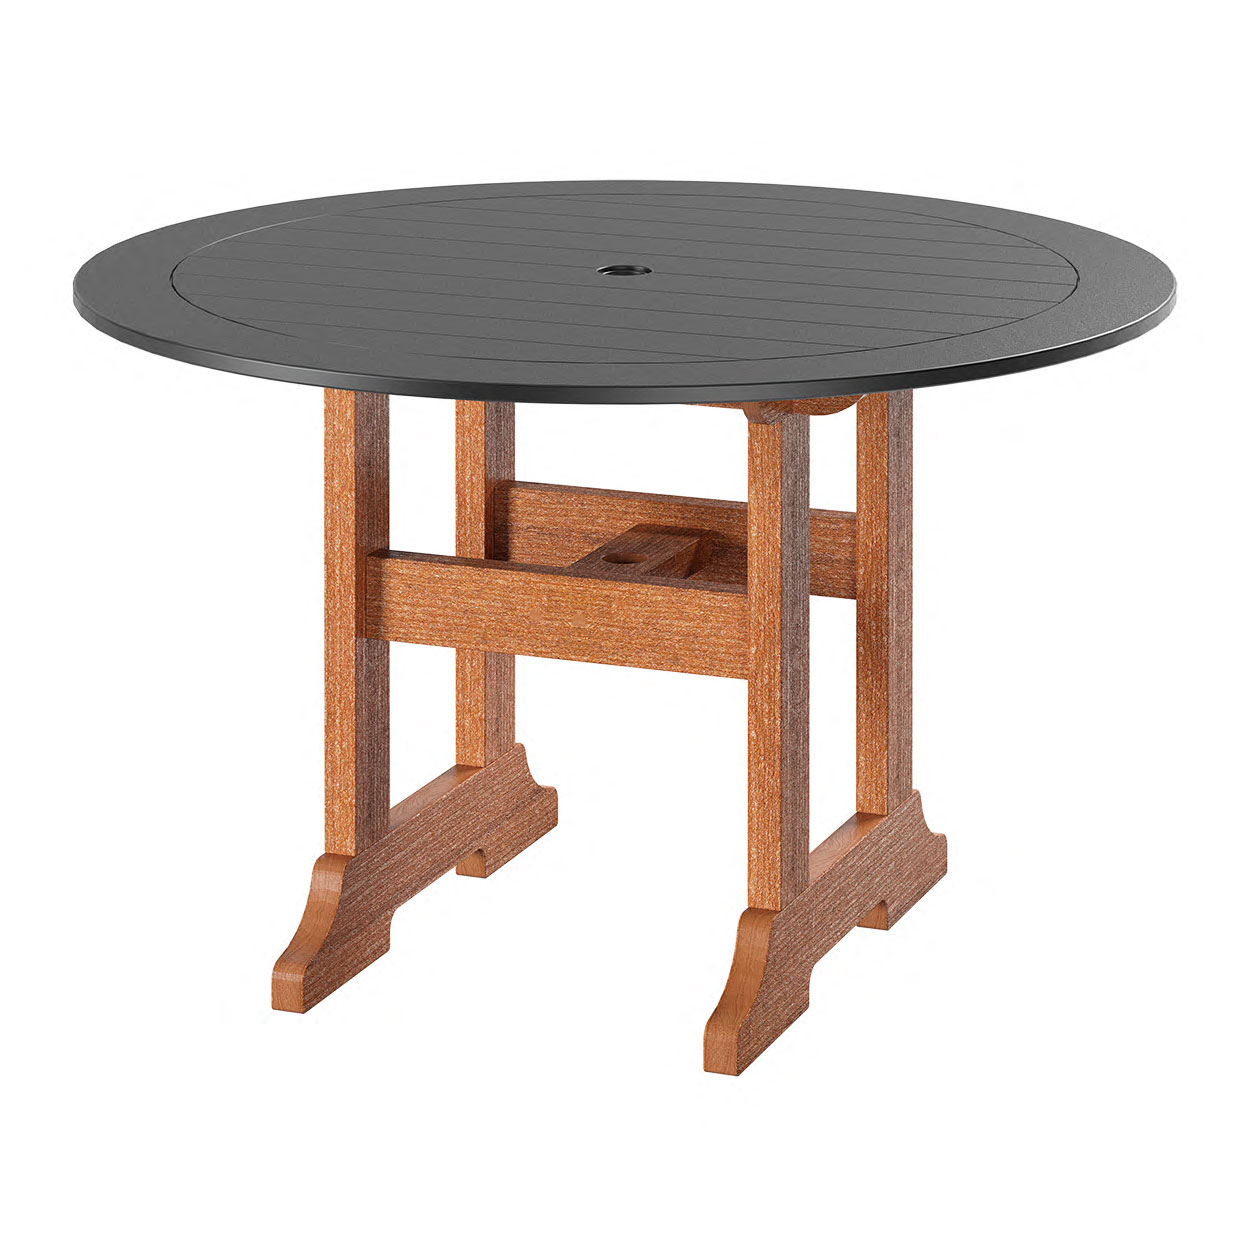 The Cranage Dining Table